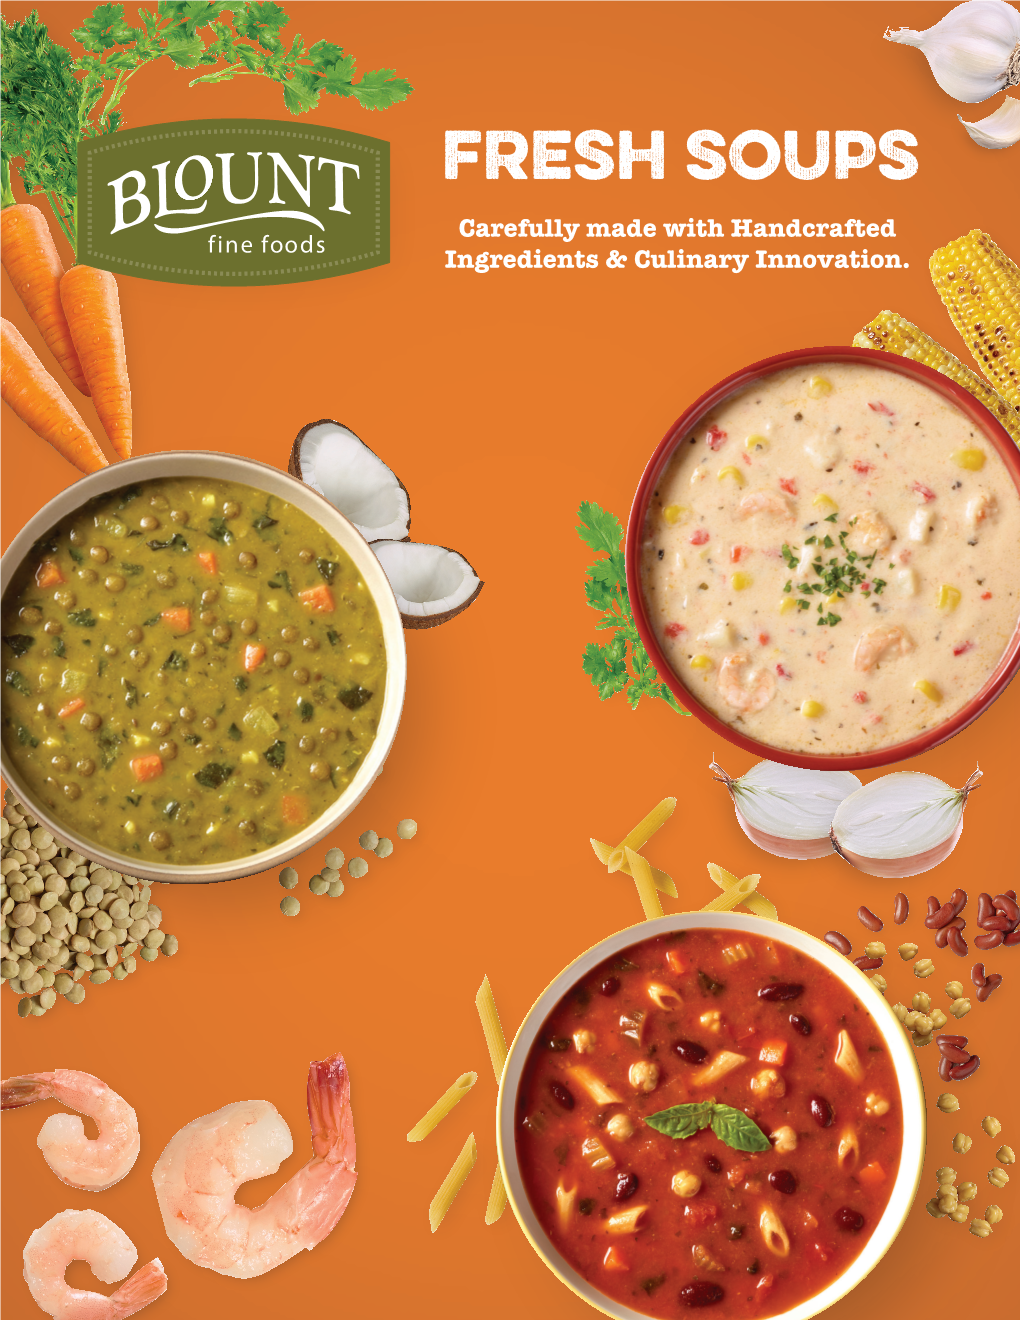 FRESH SOUPS Carefully Made with Handcrafted Ingredients & Culinary Innovation